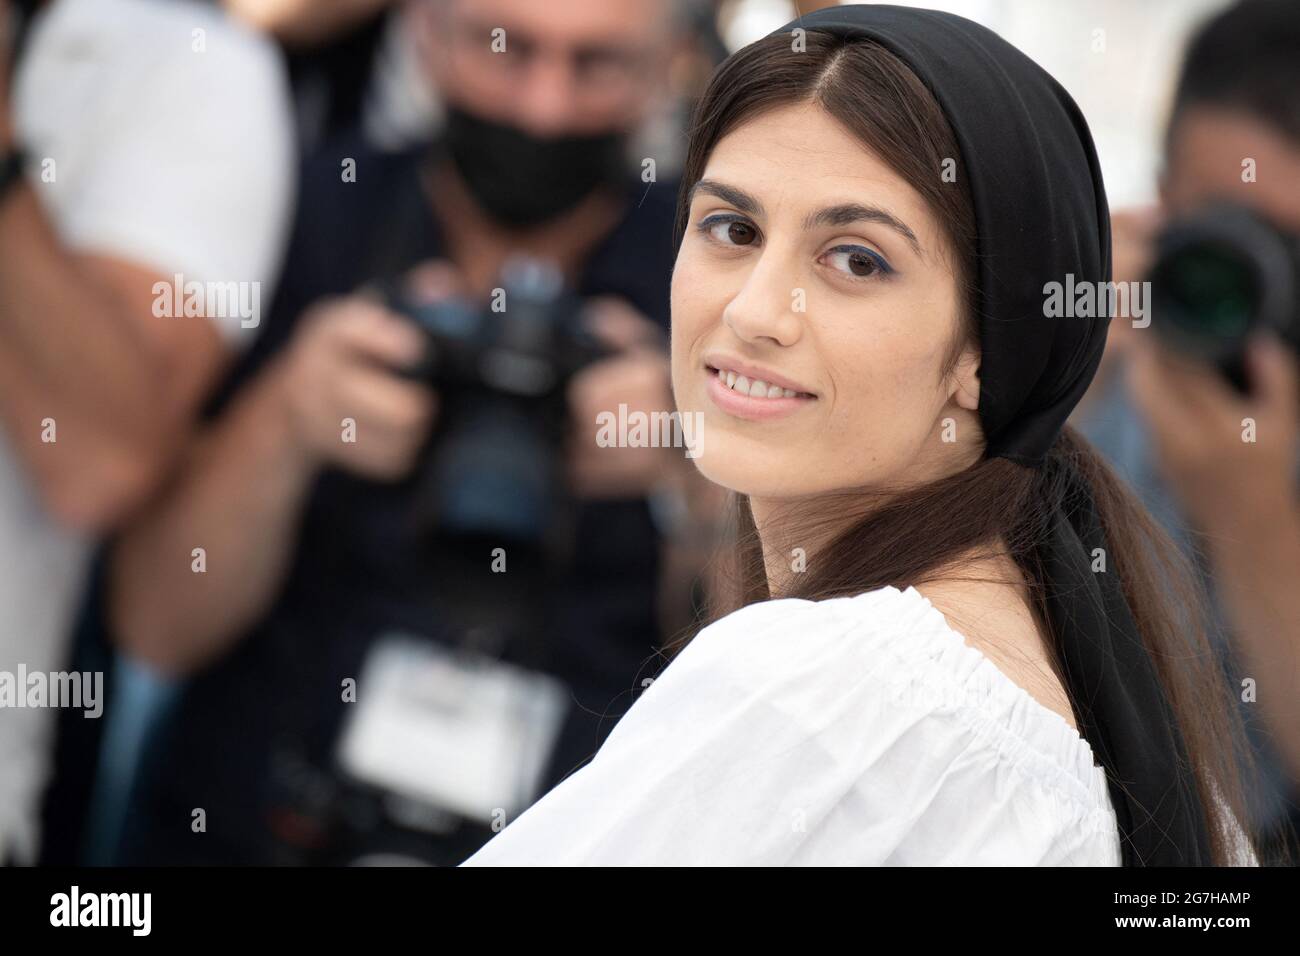 aSarina Farhadi attends the Ghahreman (A Hero) photocall during the 74th annual Cannes Film Festival on July 14, 2021 in Cannes, France. Photo by David Niviere/ABACAPRESS.COM Director Asghar Farhadi attends the Ghahreman (A Hero) photocall during the 74th annual Cannes Film Festival on July 14, 2021 in Cannes, France. Photo by David Niviere/ABACAPRESS.COM Stock Photo